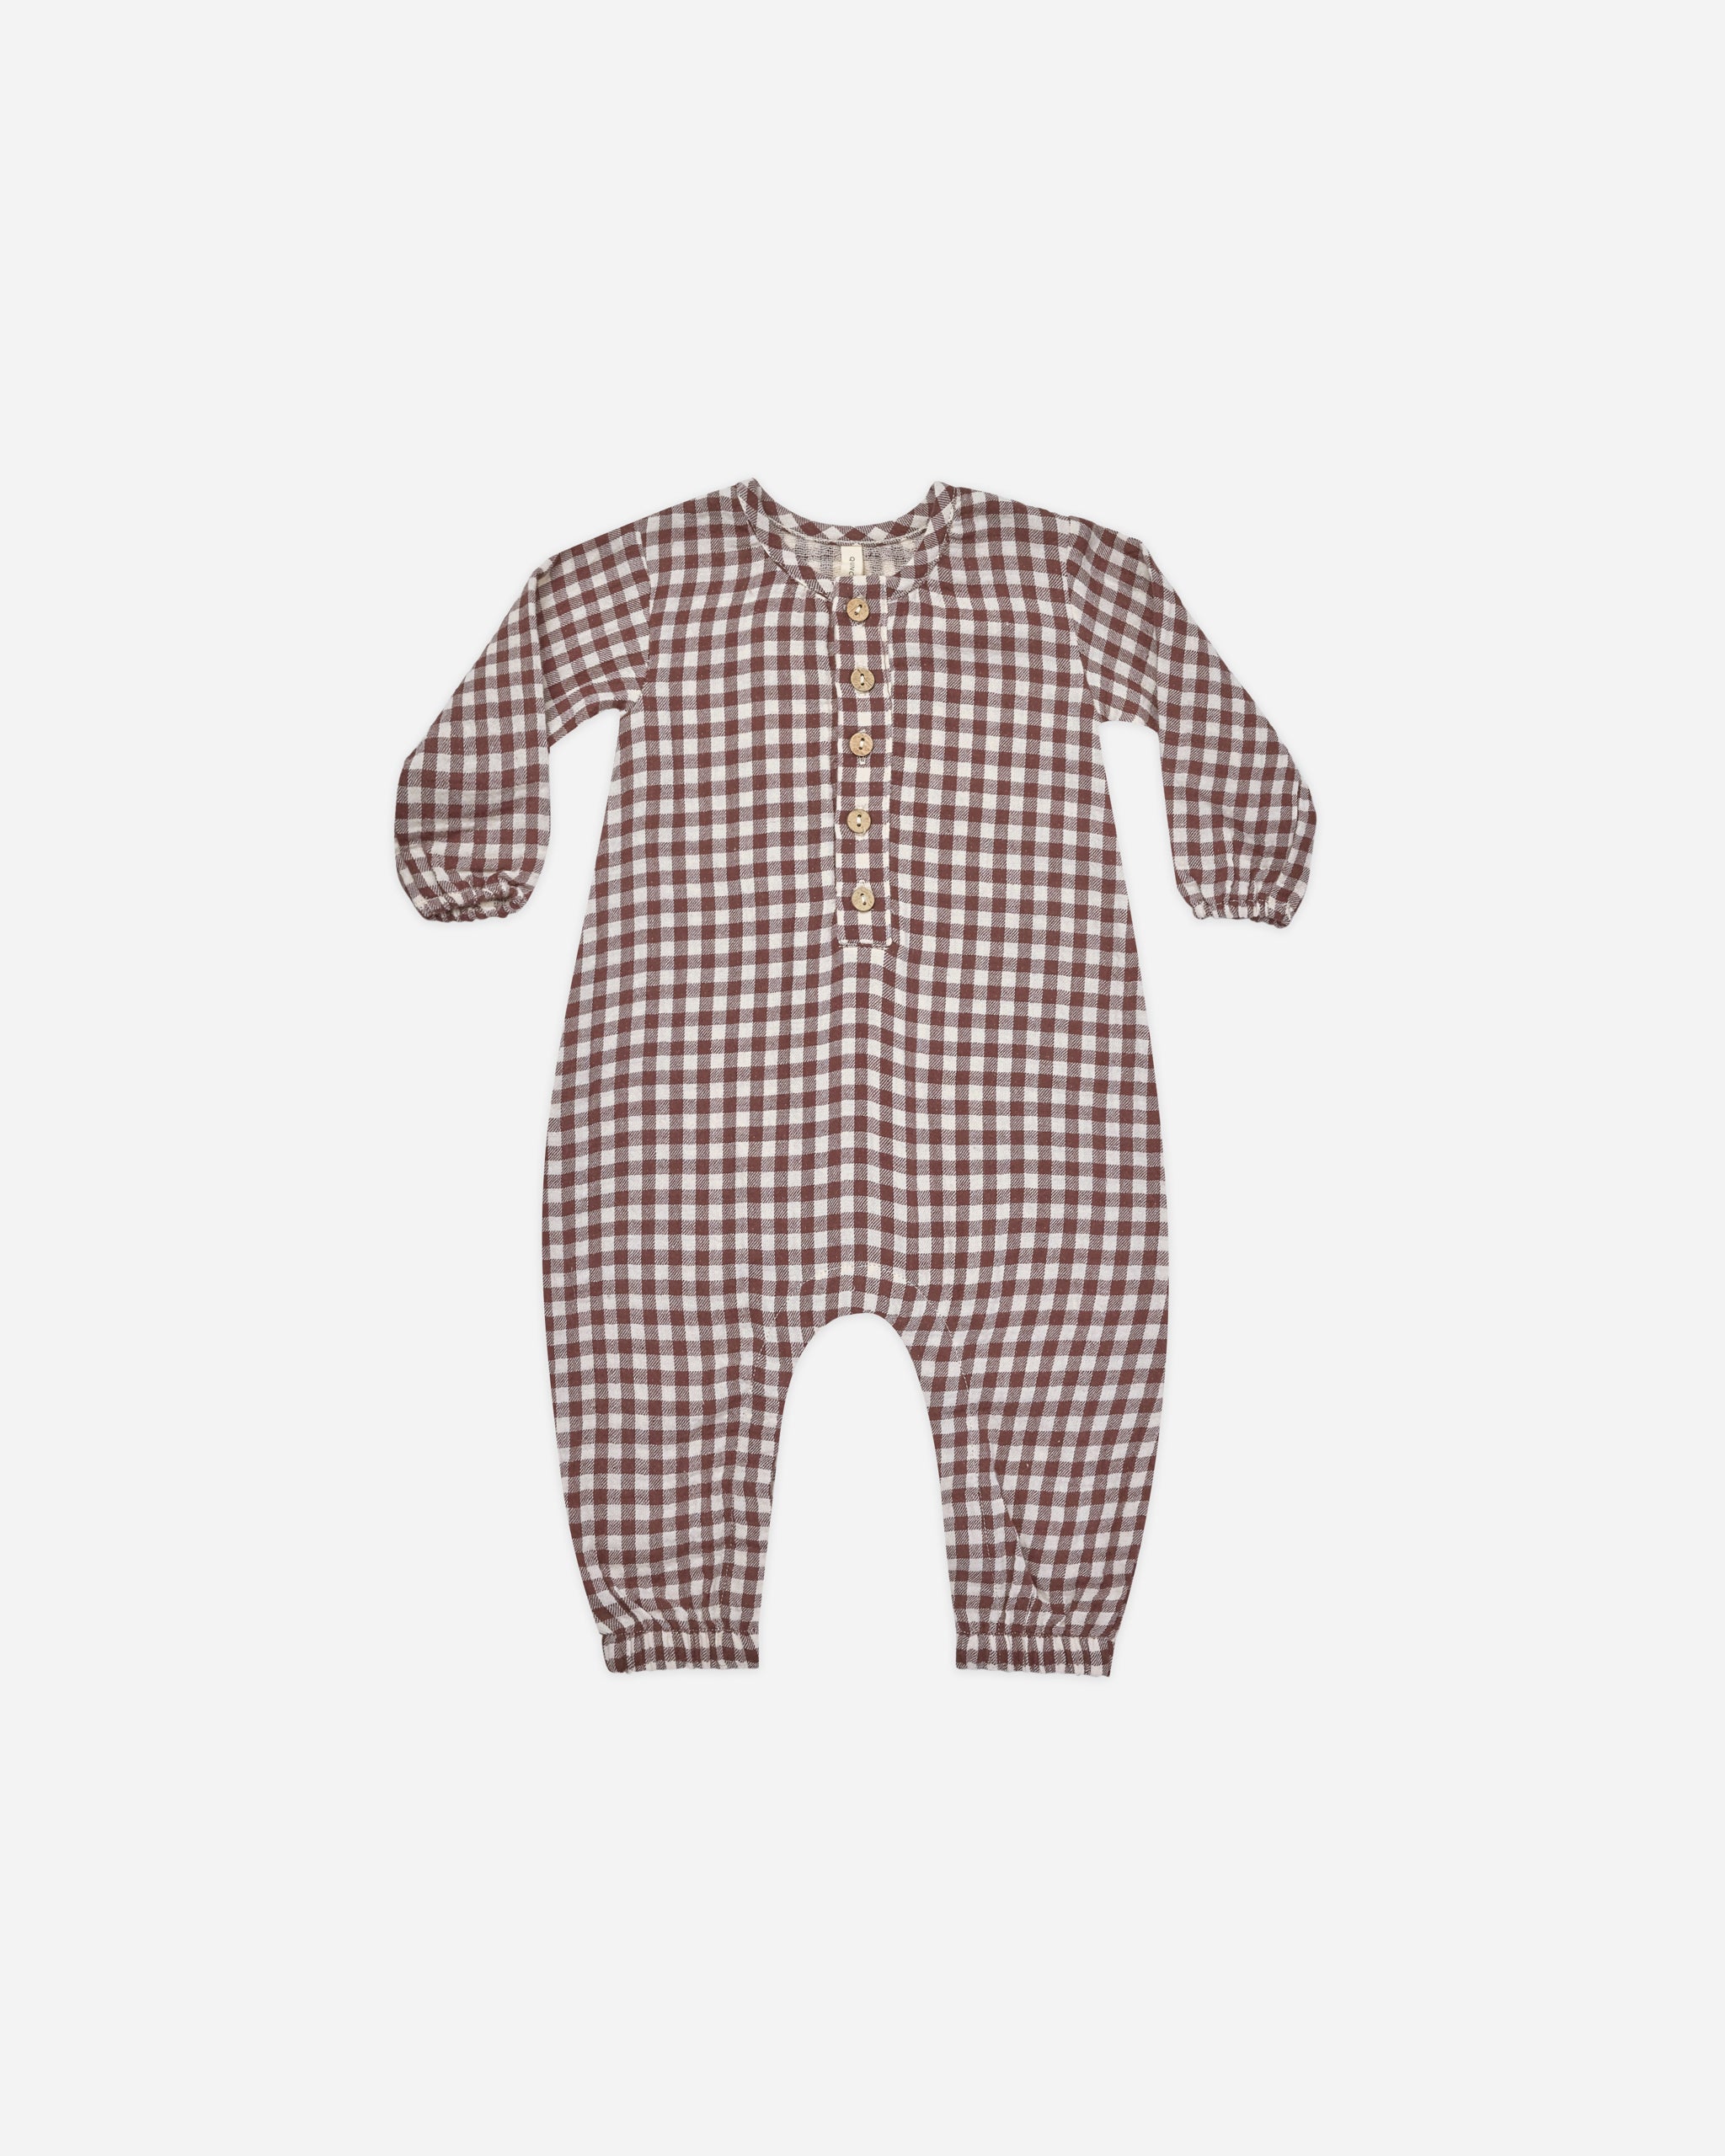 Woven Jumpsuit || Plum Gingham - Rylee + Cru | Kids Clothes | Trendy Baby Clothes | Modern Infant Outfits |